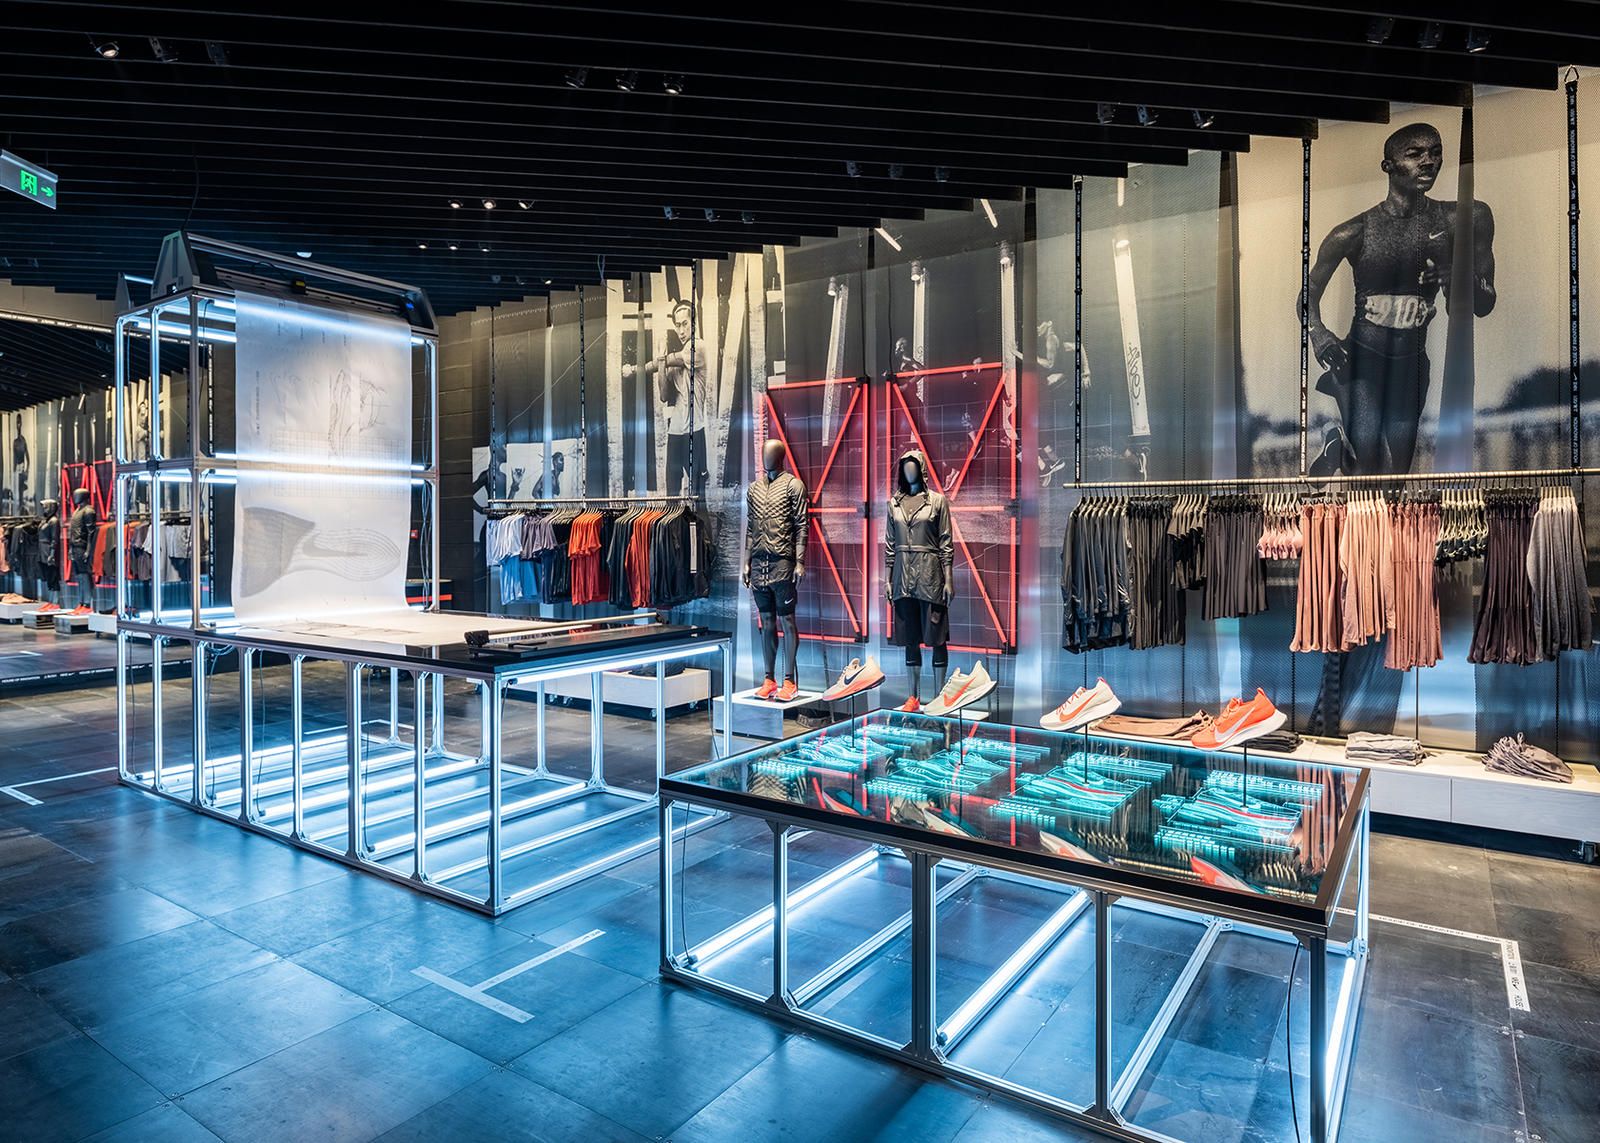 How To Make It With A Flagship Store: Tips & Cases